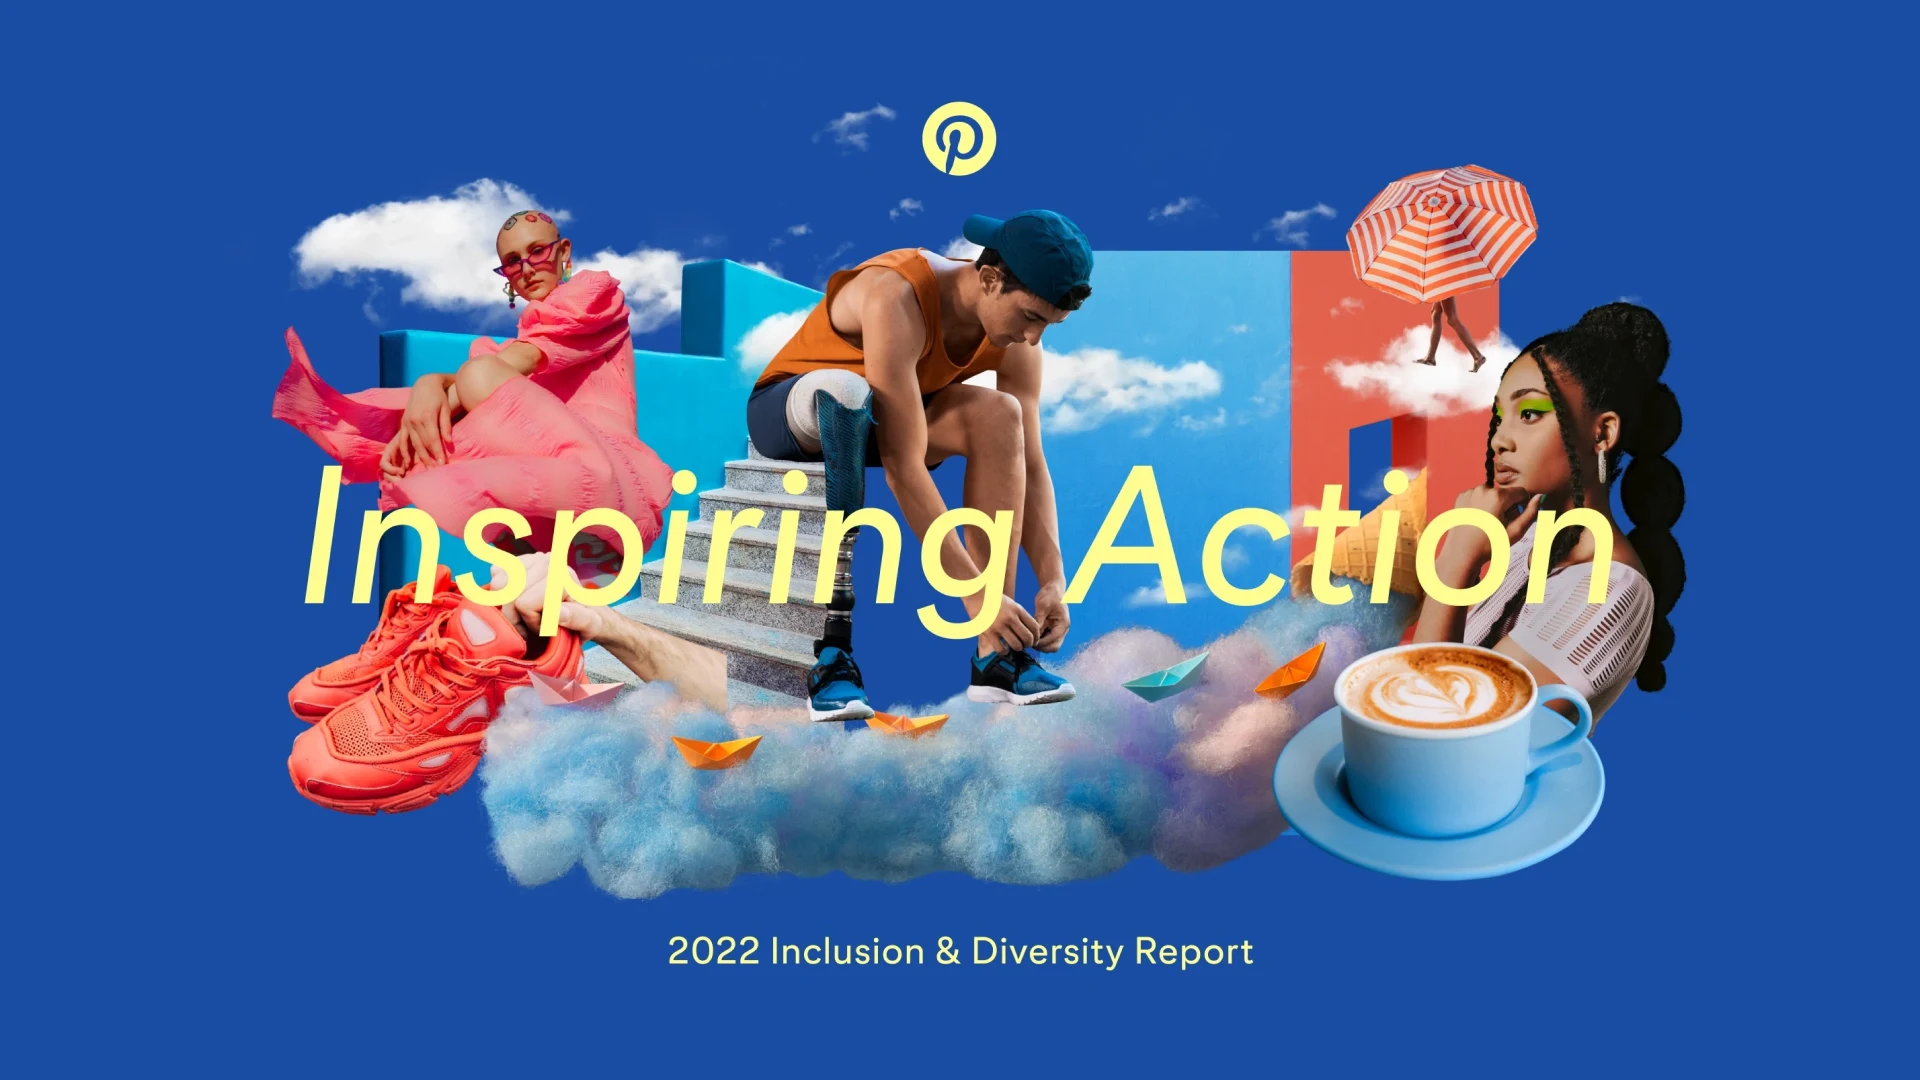 The words "Inspiring Action" are displayed over a collage of images depicting Pinterest-inspired fashion, beauty, food and lifestyle trends